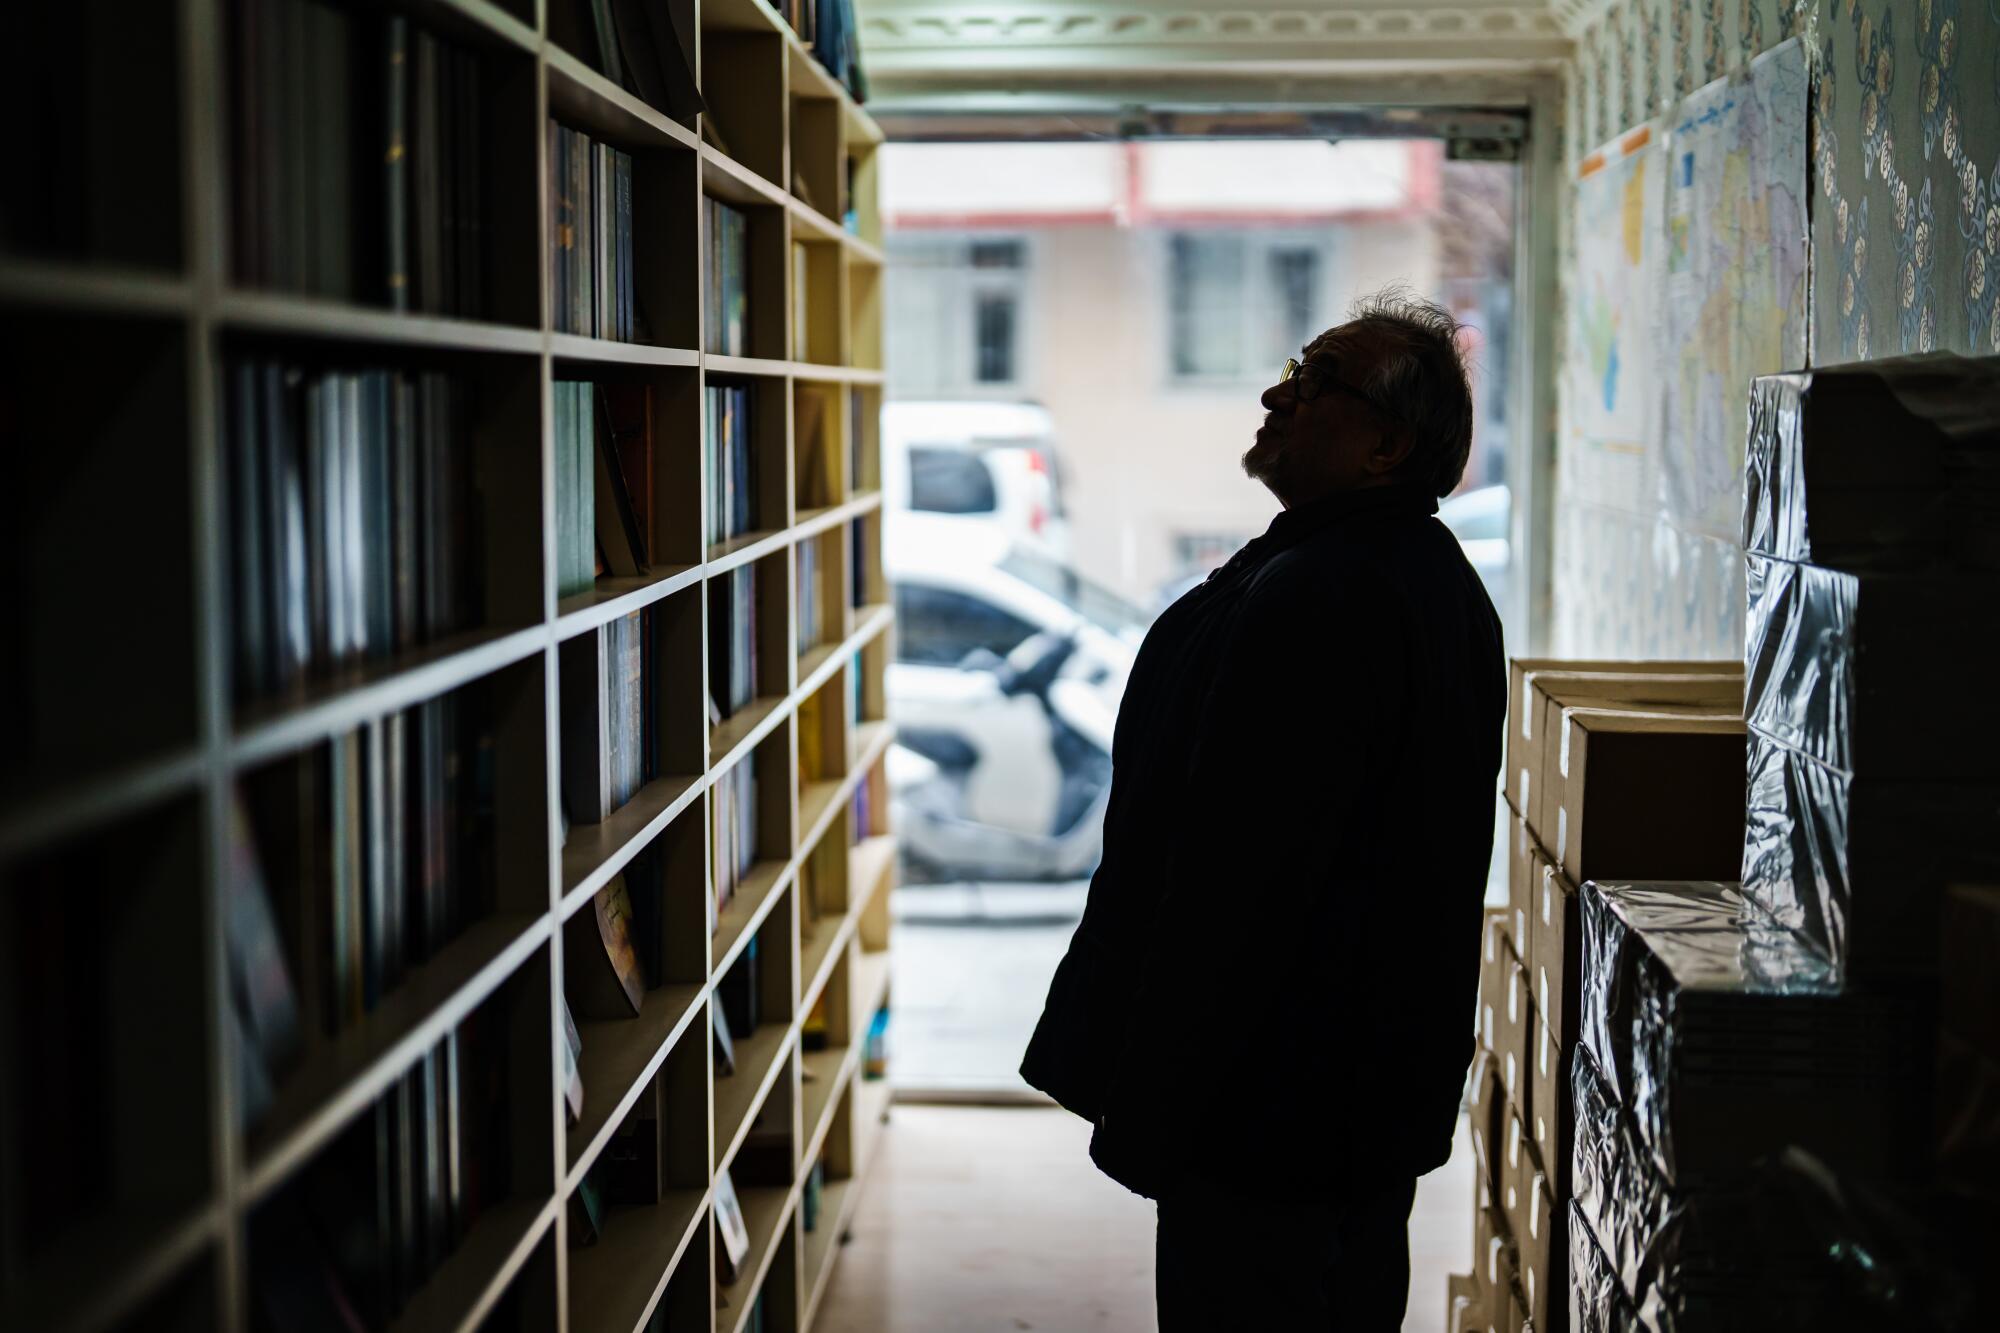 A man stands next to bookshelves, looking up.